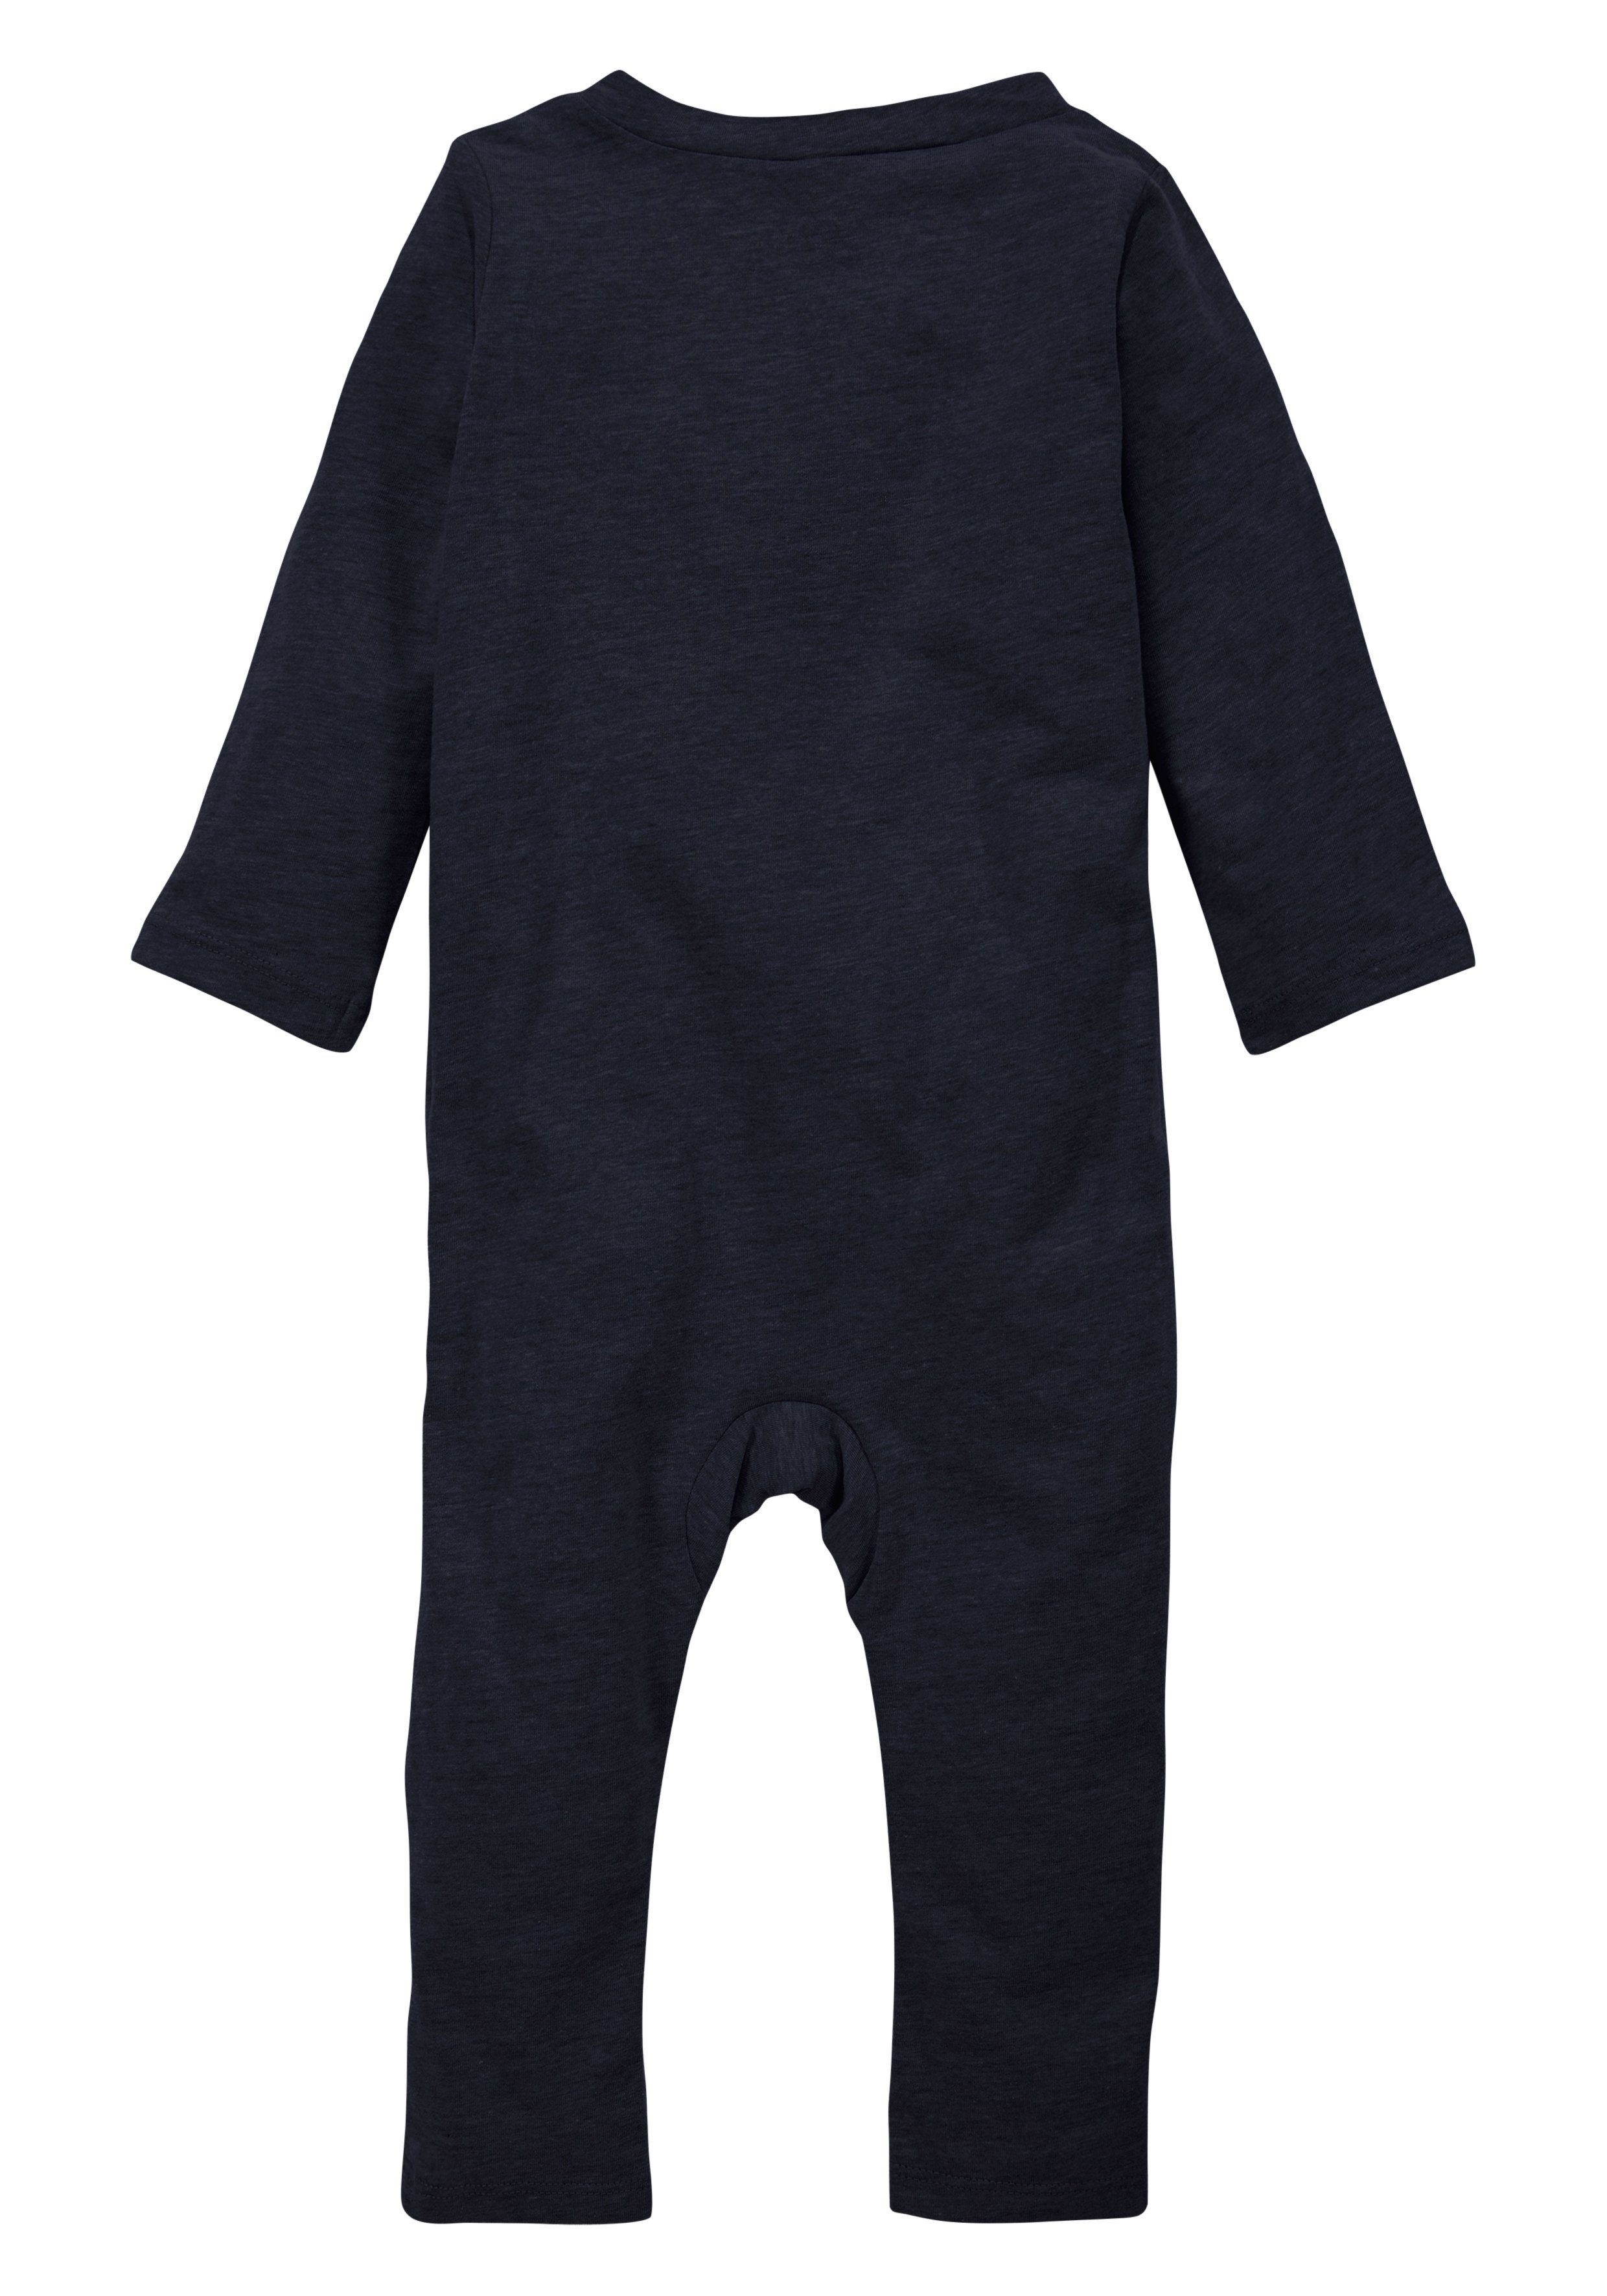 obsidian COVERALL Strampler NON-FOOTED Nike Sportswear HBR